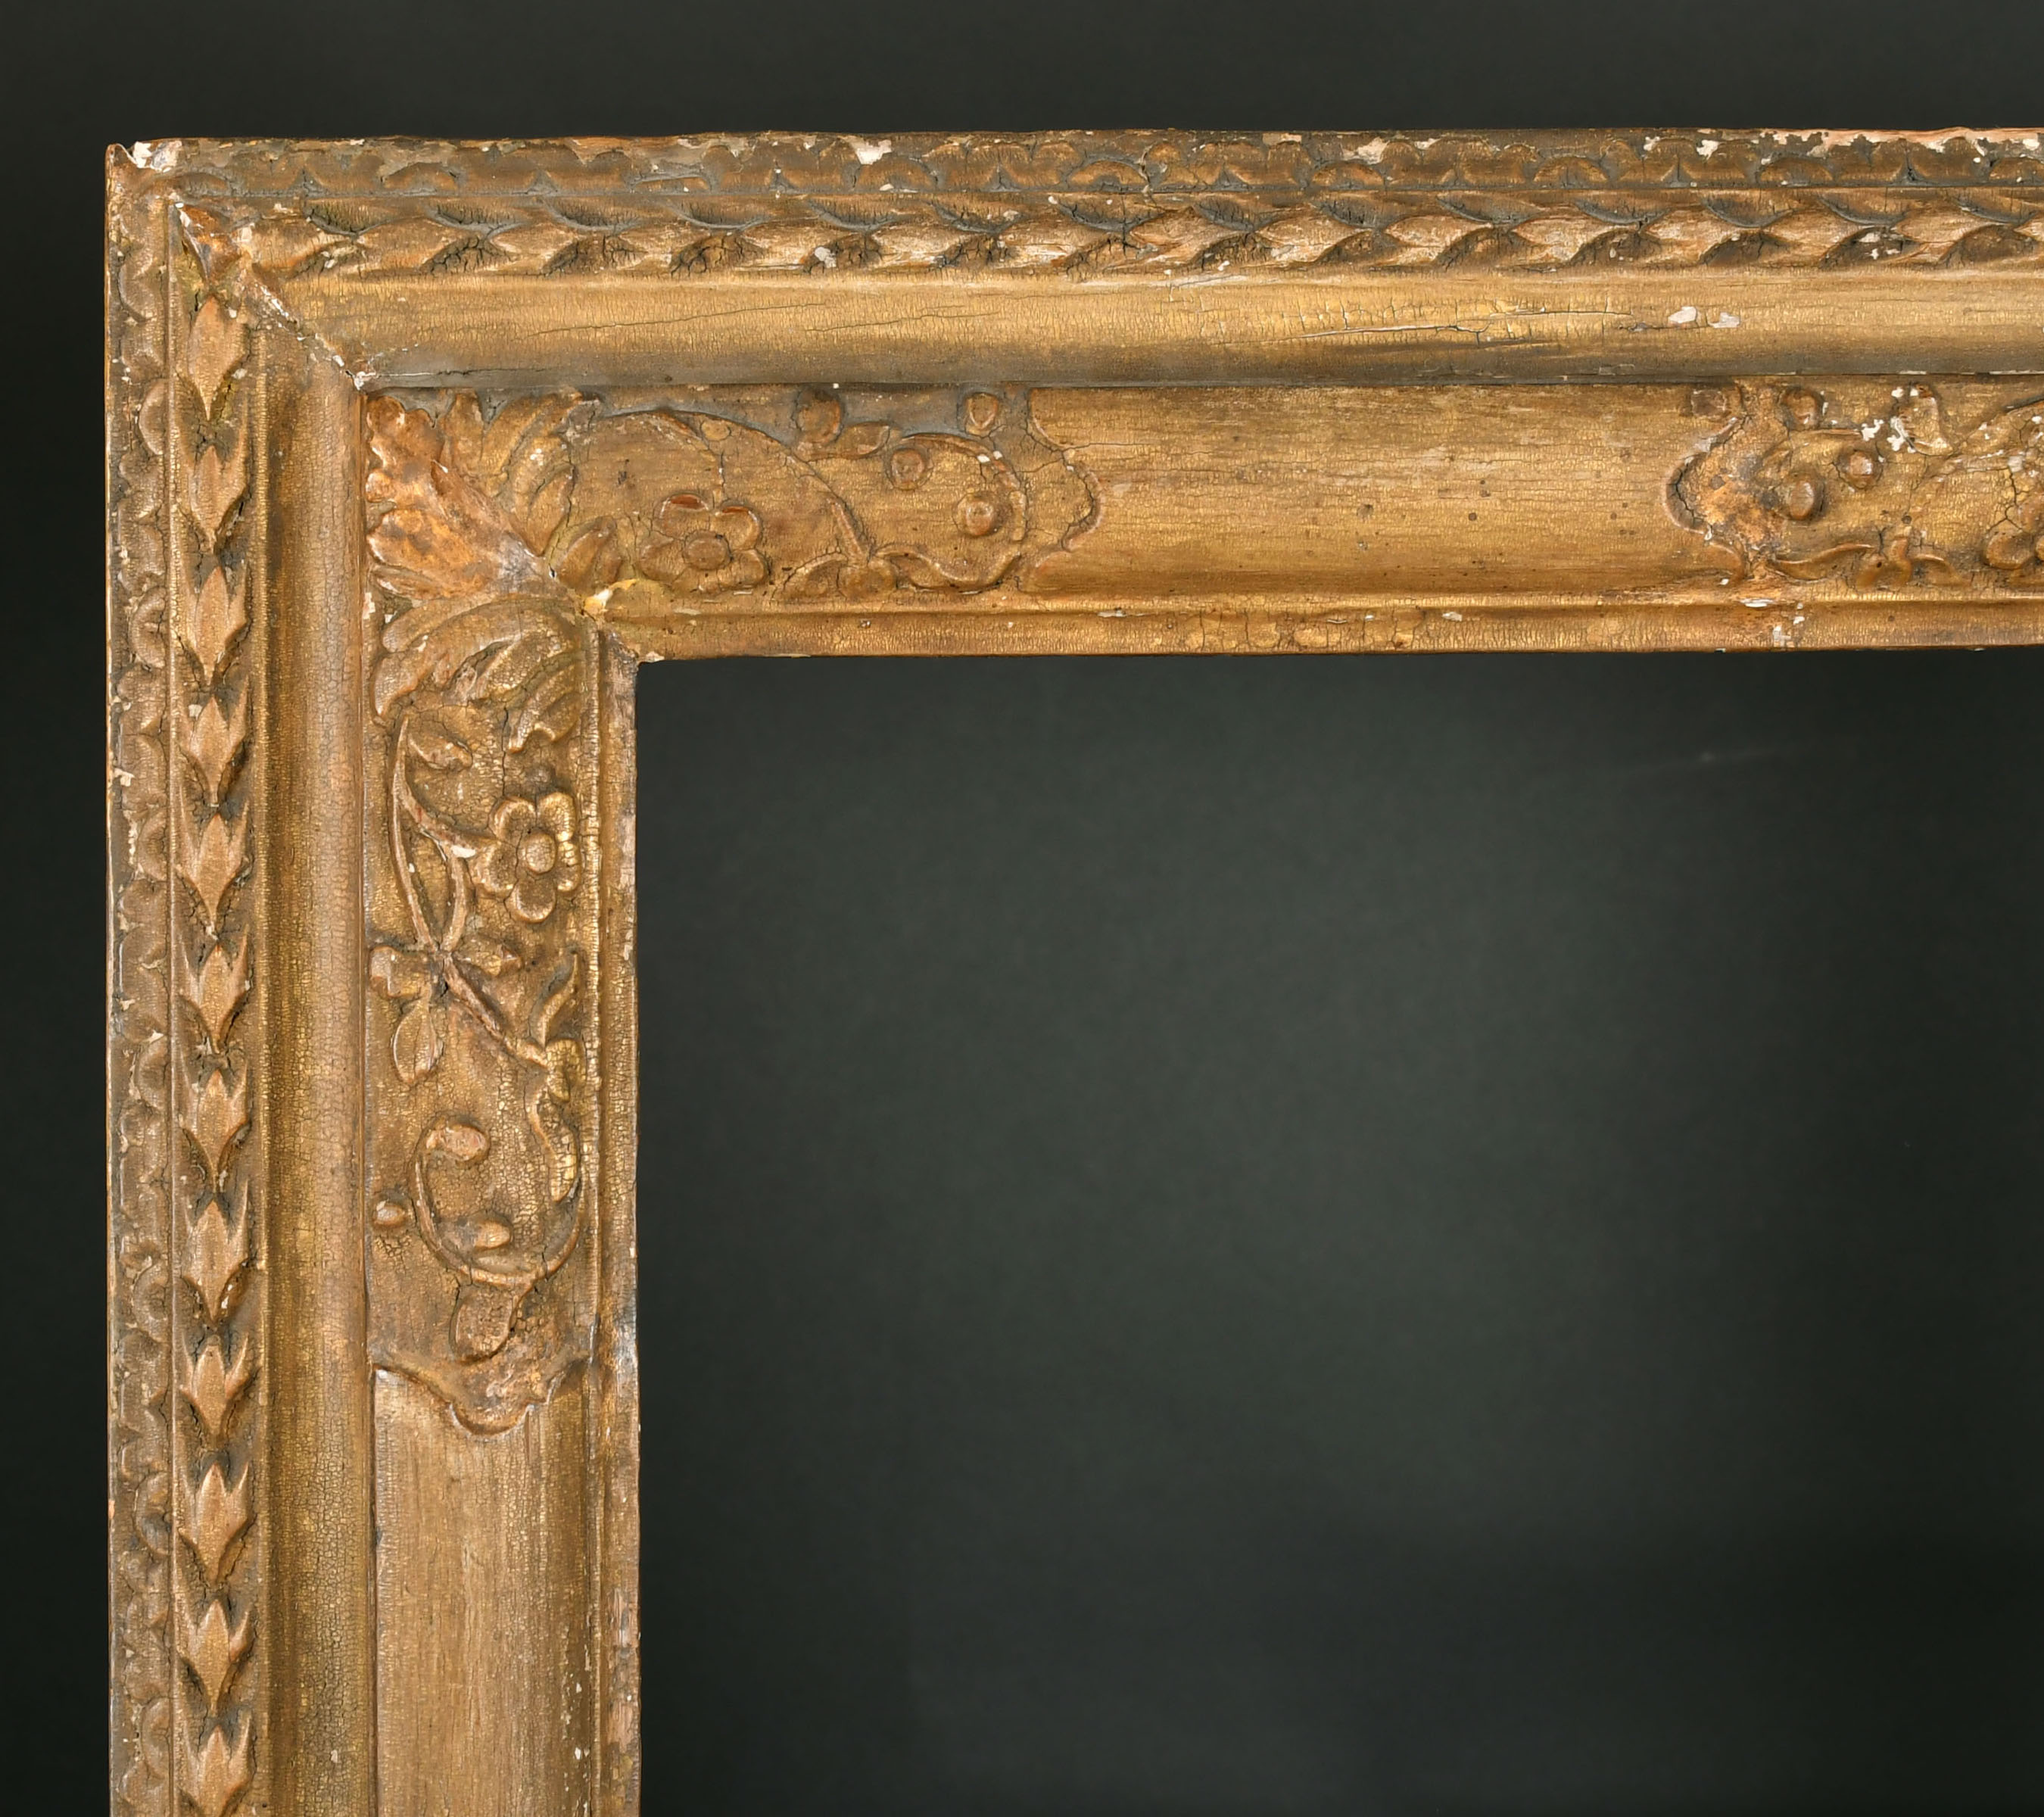 Late 18th Century English School. A Craved Giltwood Frame, with Lely panels, rebate 31" x 24.5" (